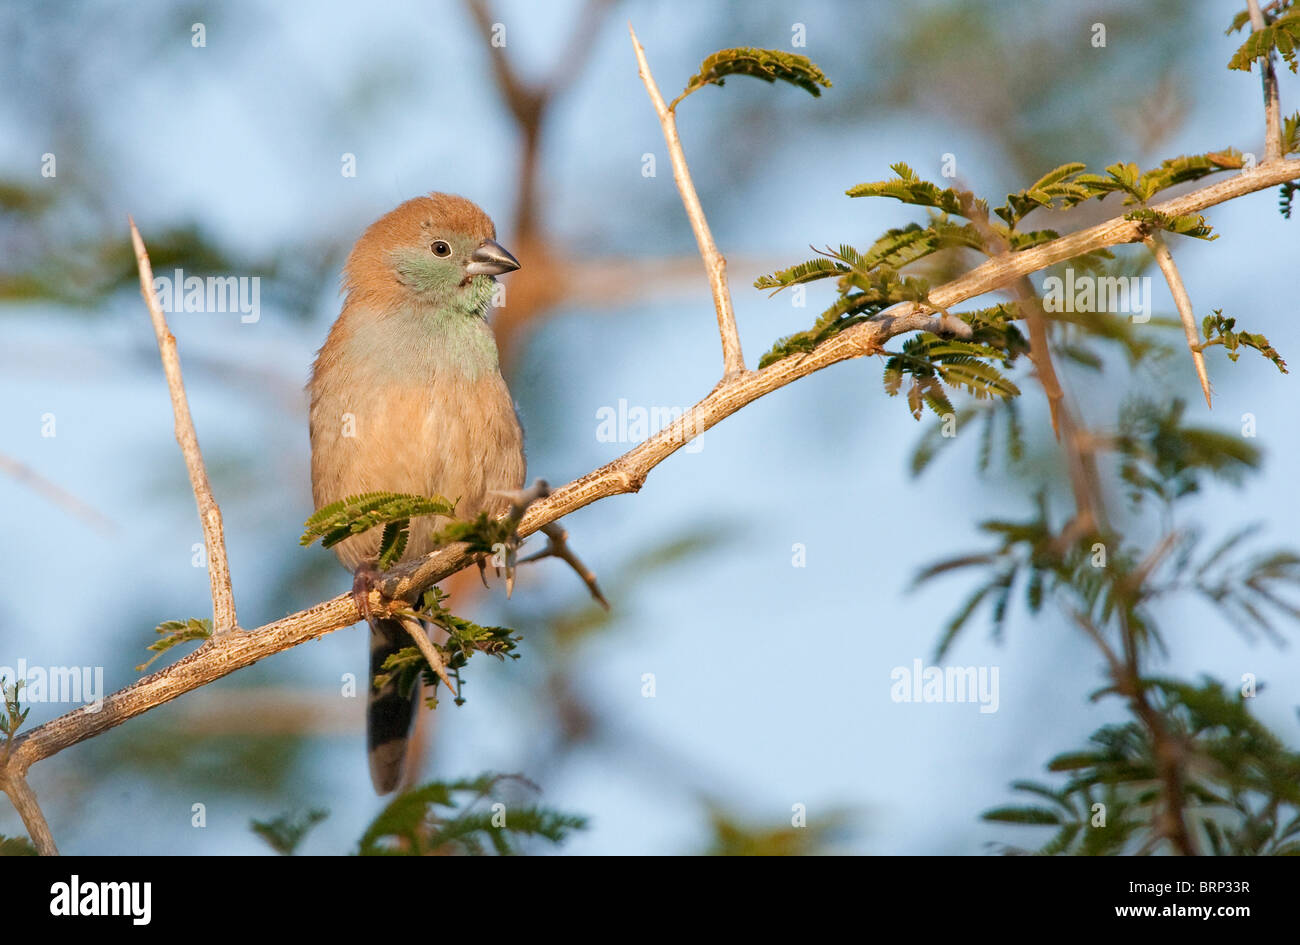 Blue Waxbill perched on a branch Stock Photo